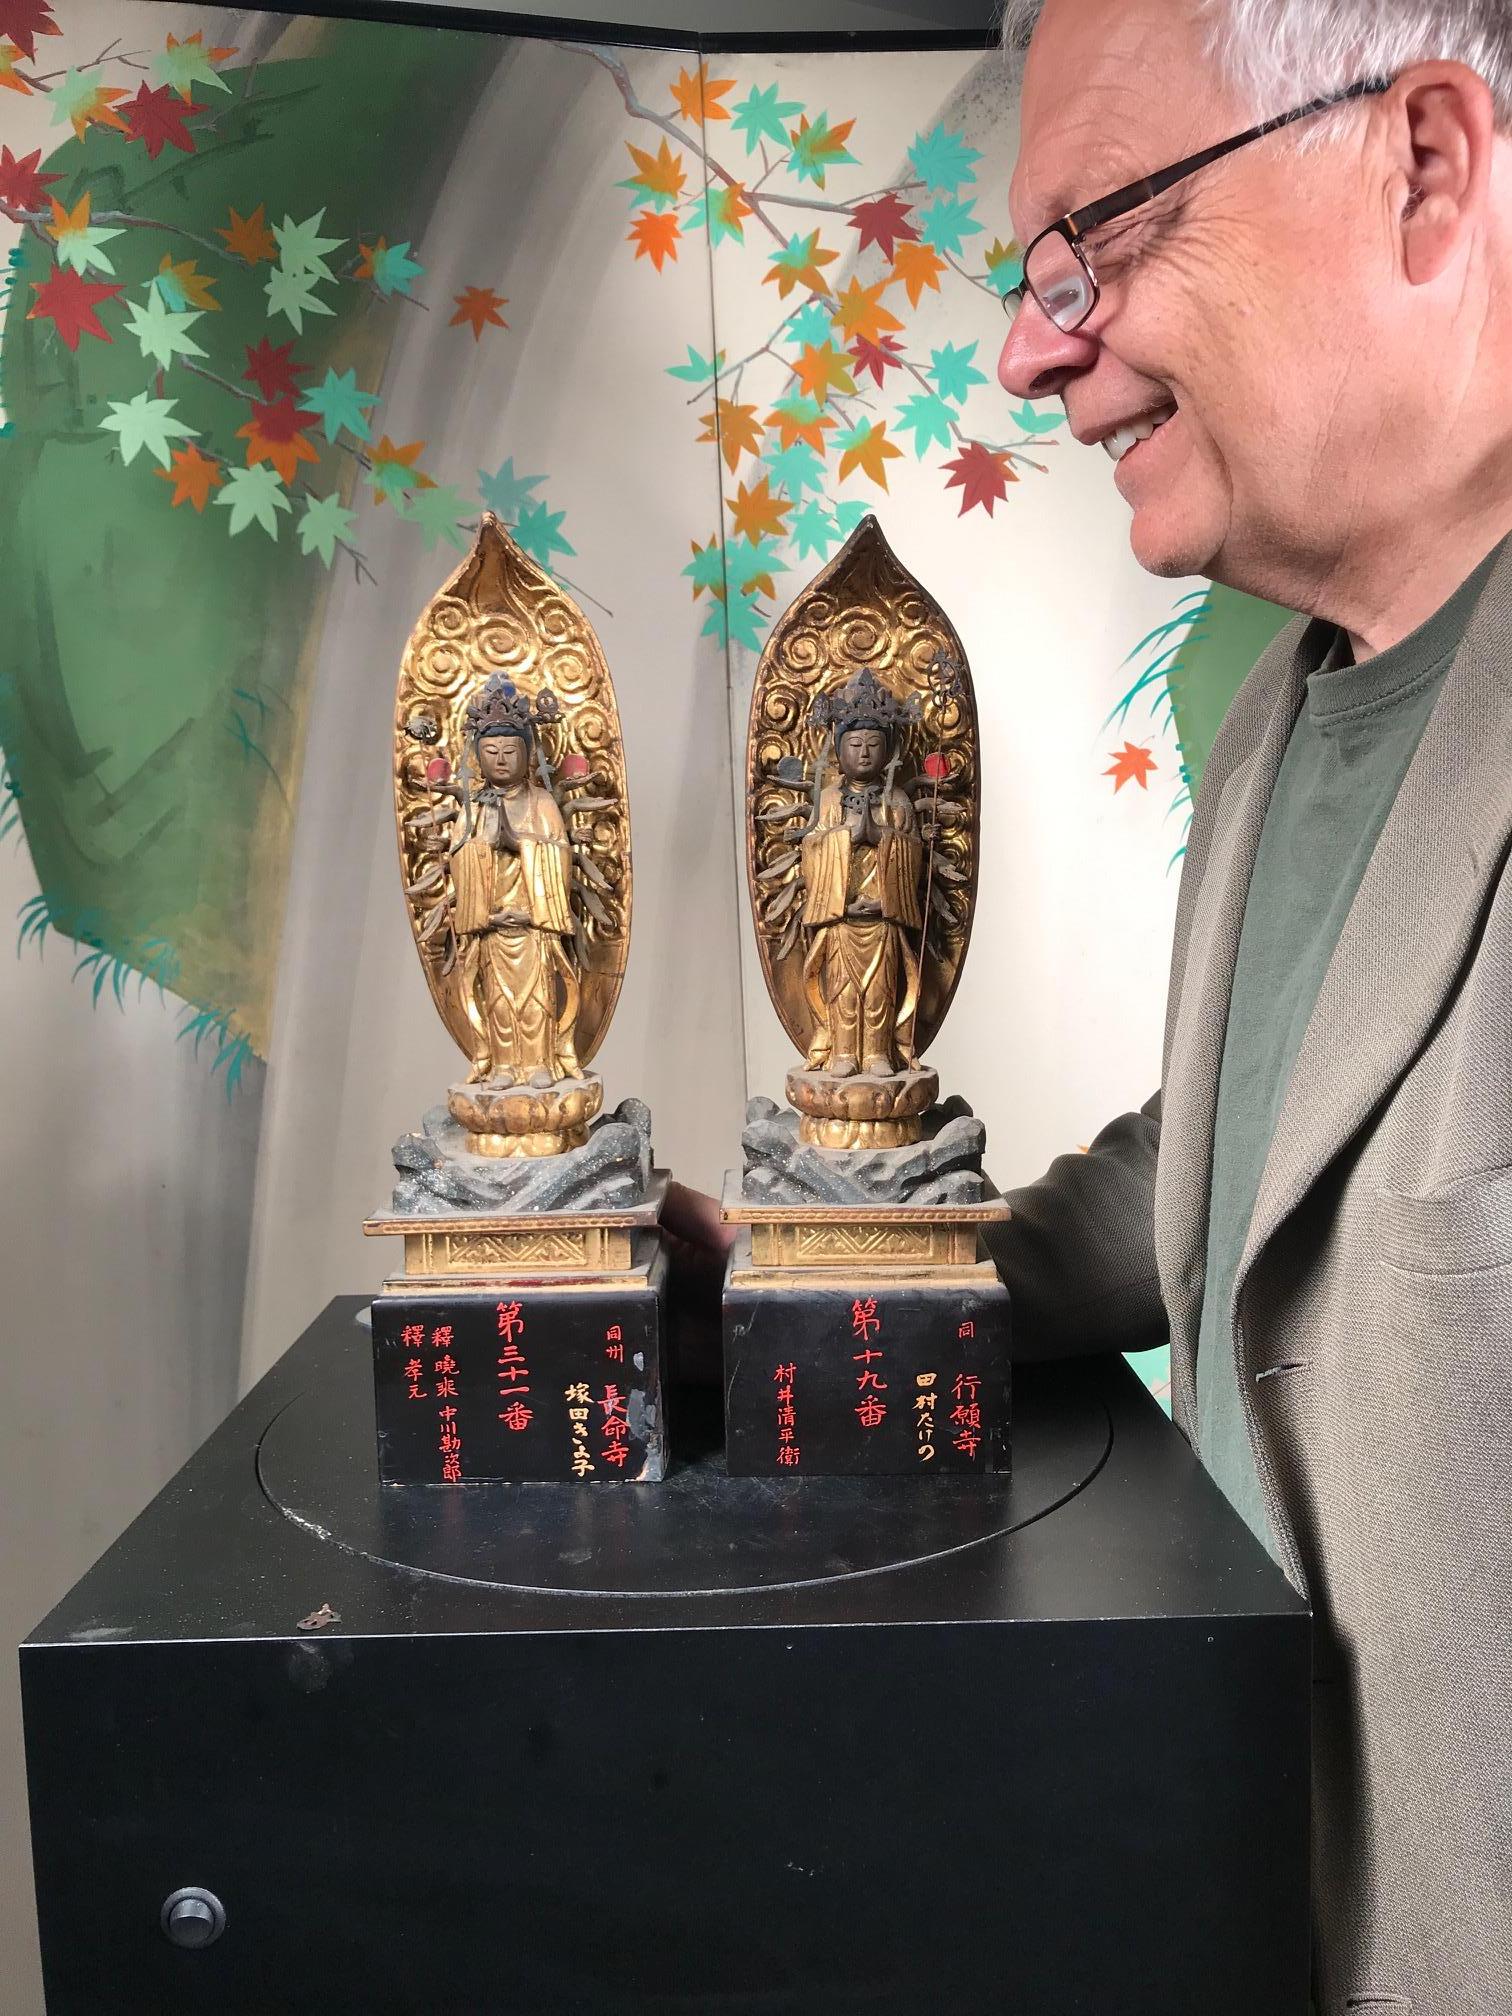 This is a scarce pair of heavenly Japanese temple finds: gold gilt and lacquered wooden crowned Kanons (Guan yin) standing with hands clasped in admiration and prayer mudra which symbolically signify compassion and healing powers. 

They are